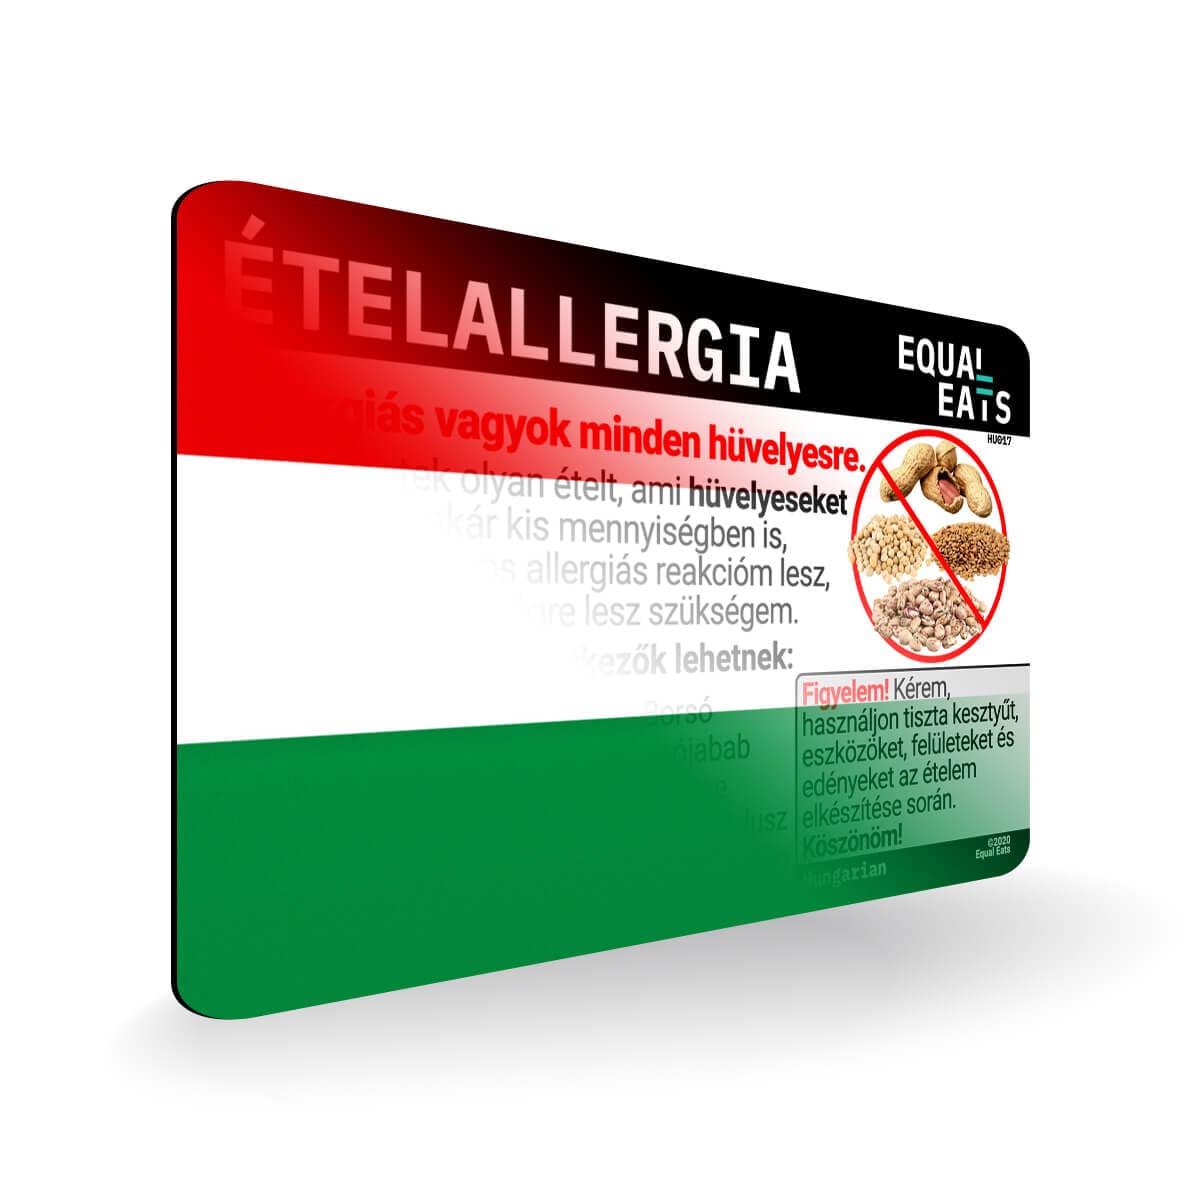 Legume Allergy in Hungarian. Legume Allergy Card for Hungary